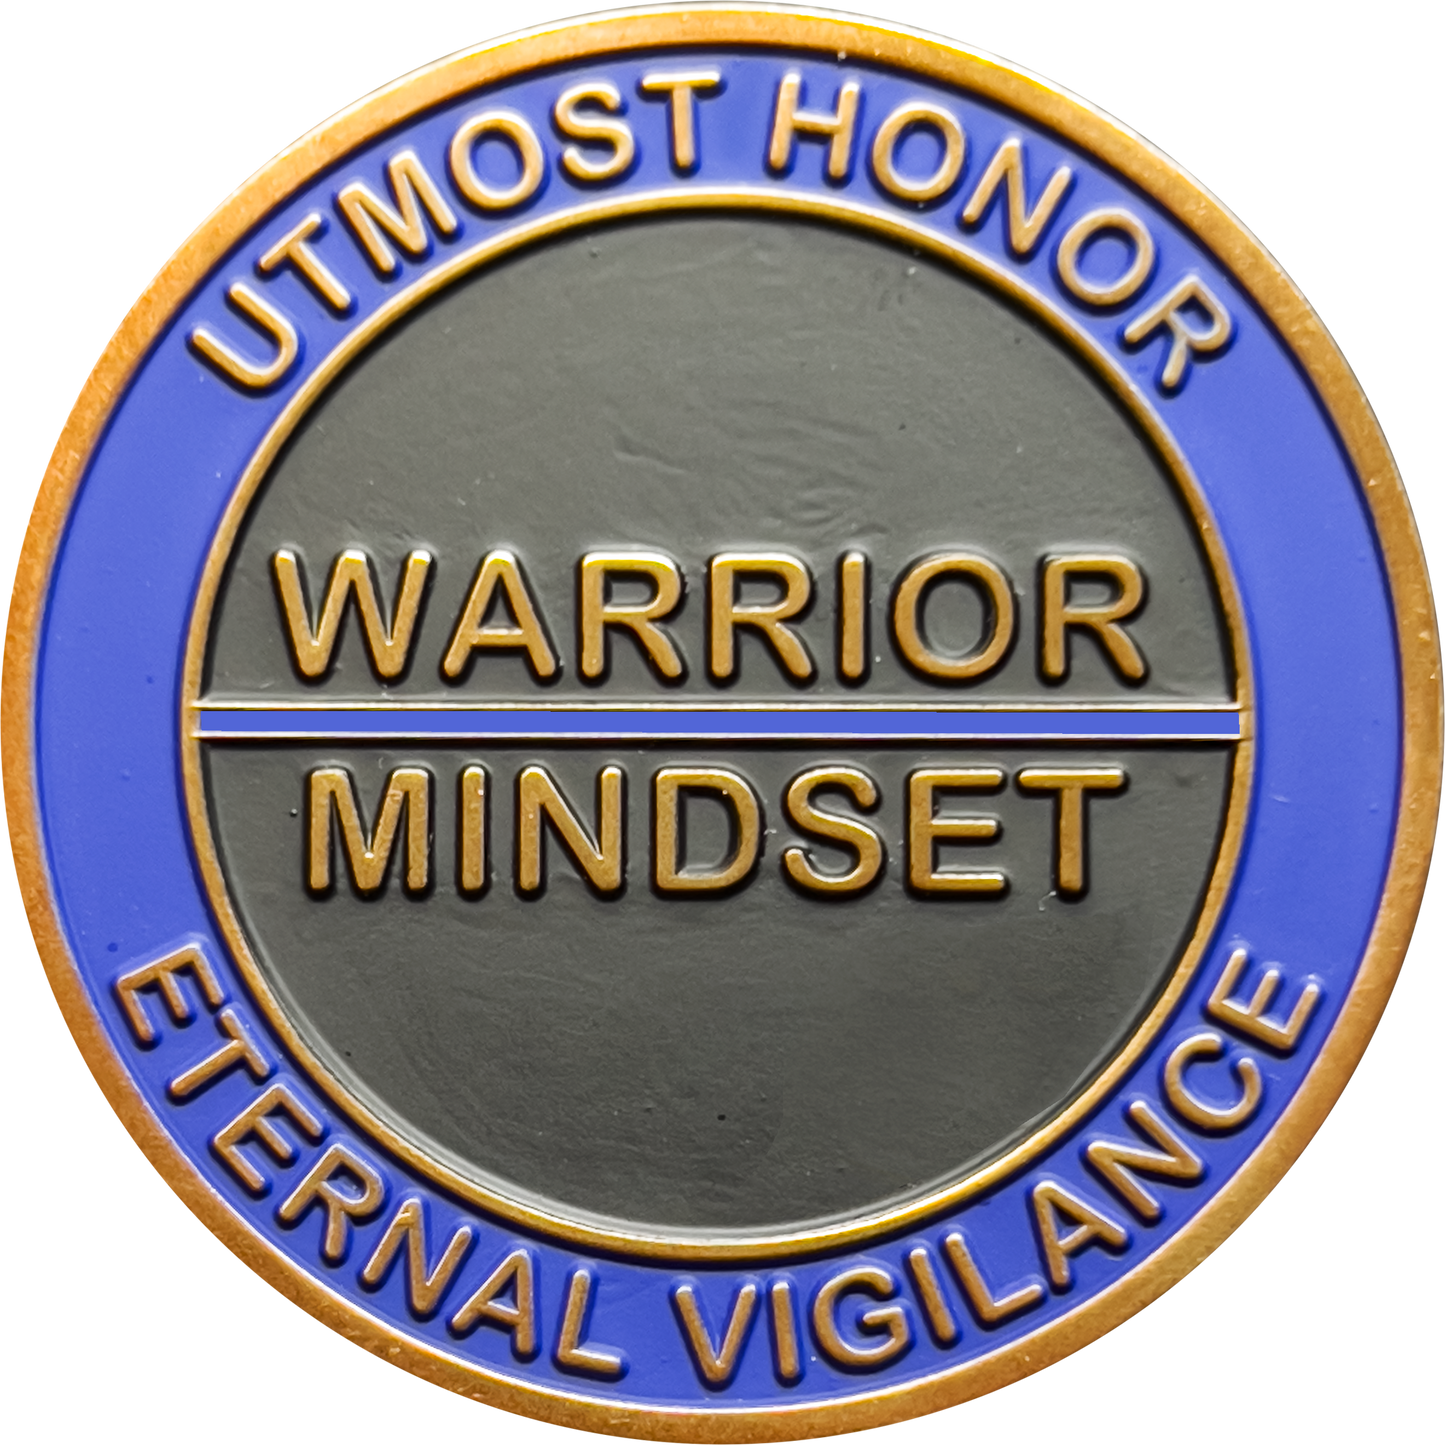 GL8-004 Warrior Mindset Challenge Coin Thin Blue Line NYPD LAPD ATF FBI CBP